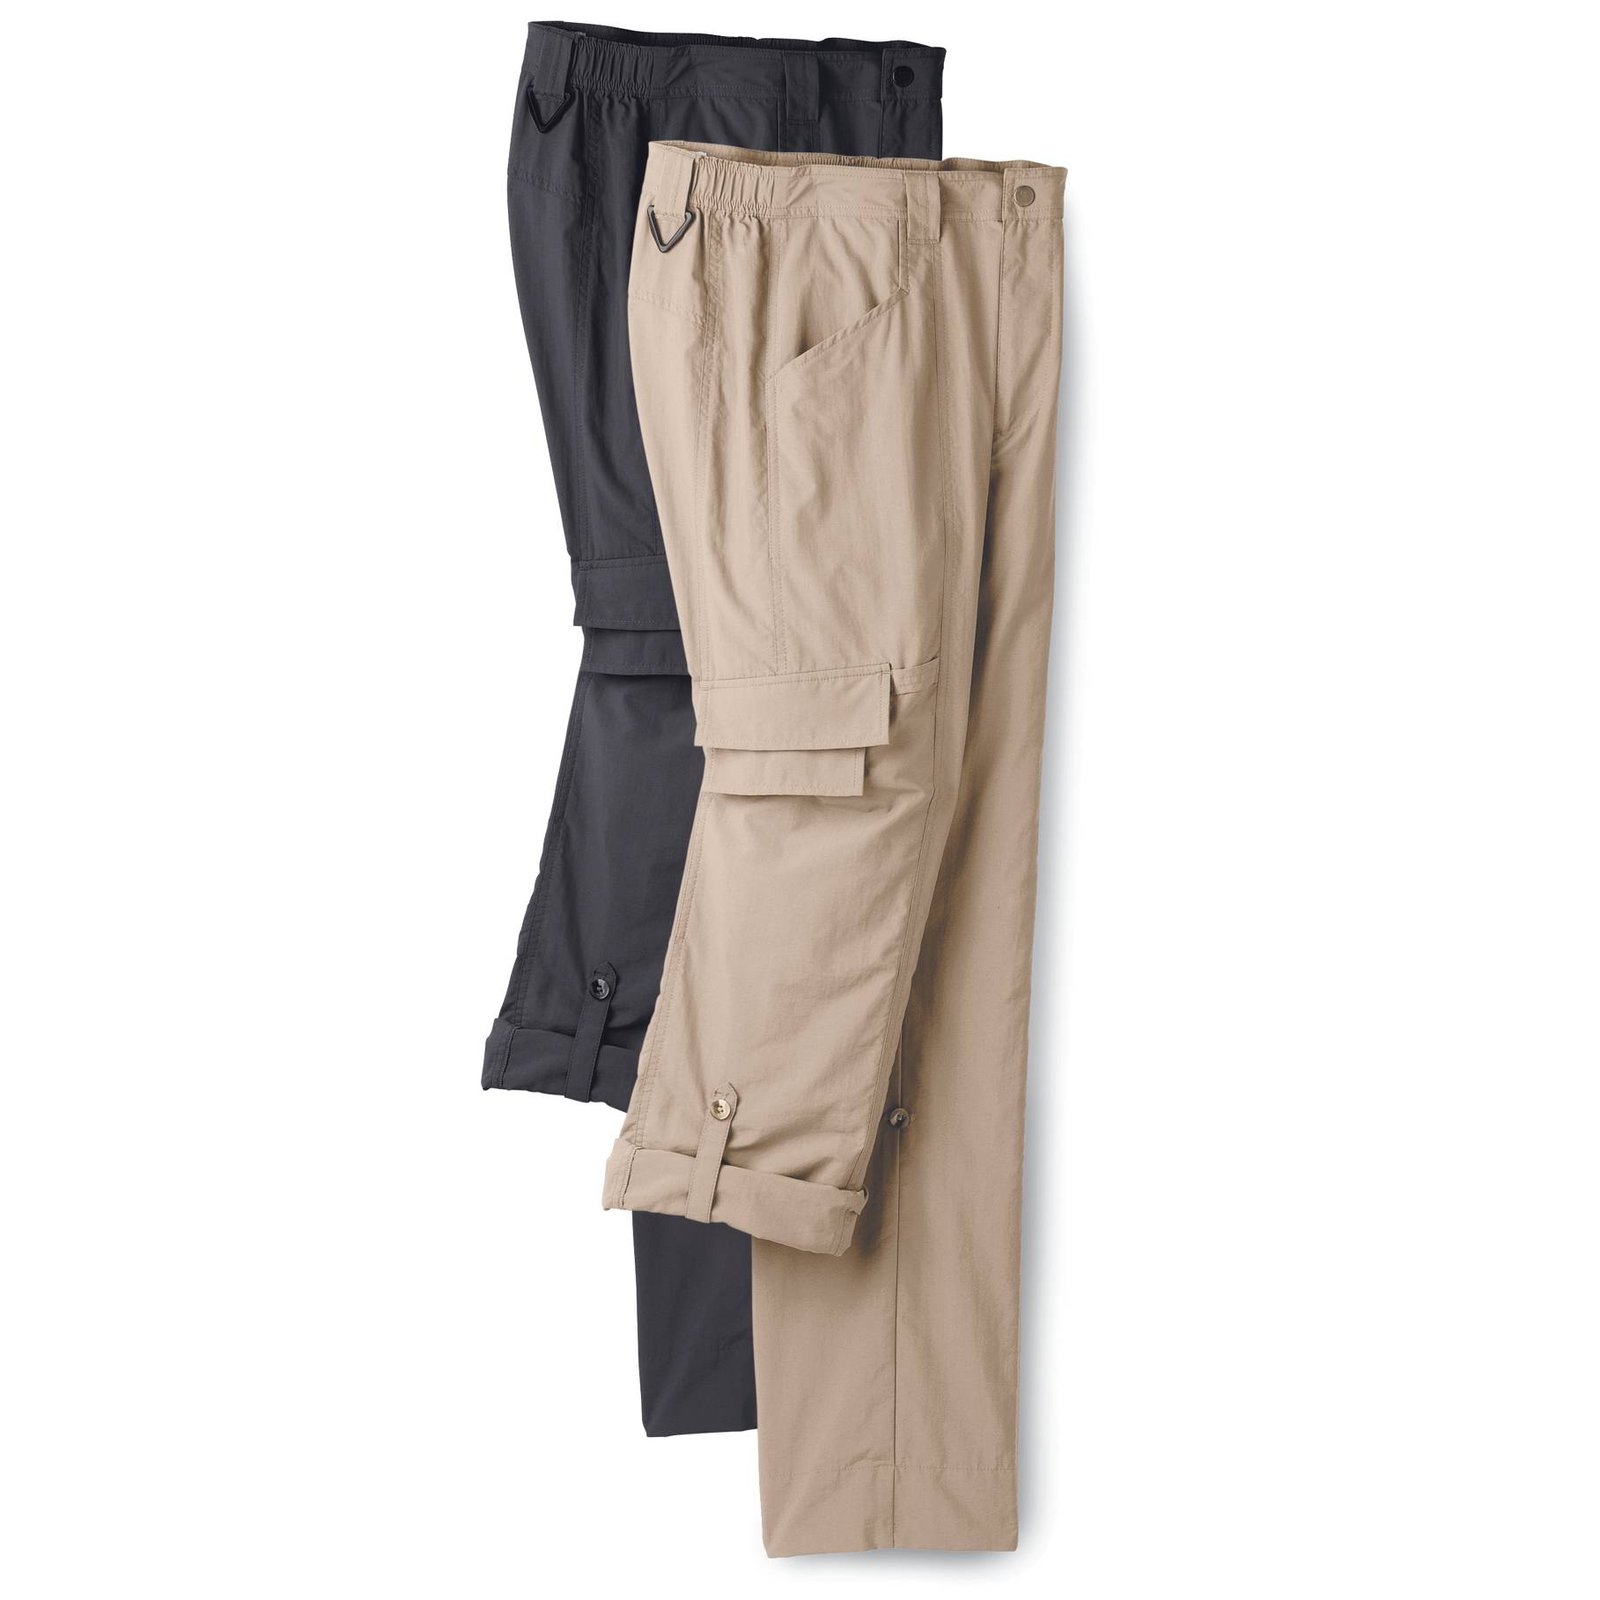 How to Keep Your Convertible Hiking Pants in Top Shape?